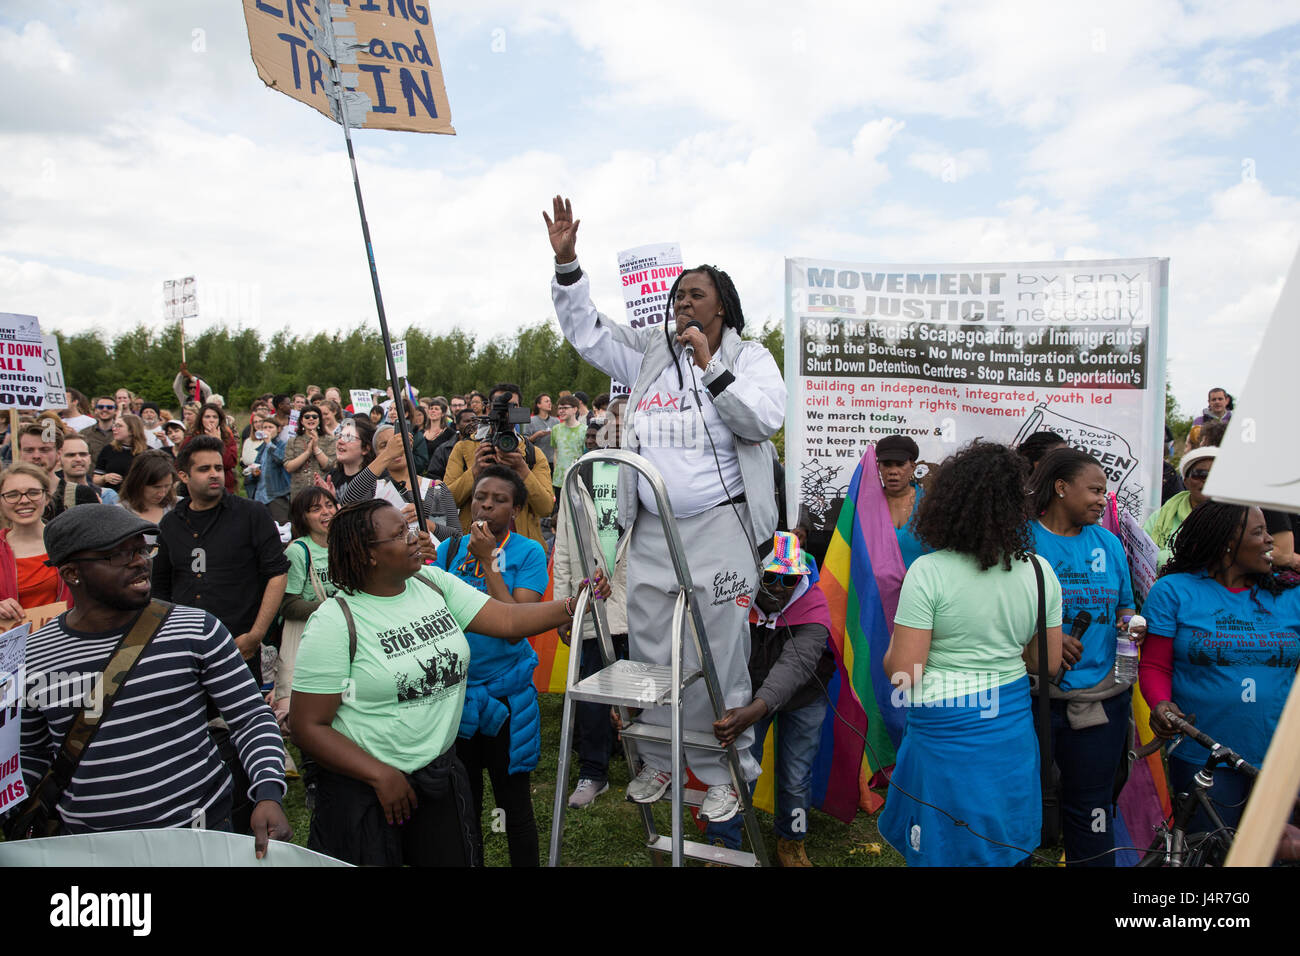 Milton Ernest, UK. 13th May, 2017. Mabel Gawanas, who was detained for almost three years at Yarl's Wood Immigration Removal Centre, addresses over a thousand campaigners against immigration detention attending a protest organised by Movement For Justice By Any Means Necessary outside the detention centre. Campaigners, including former detainees, called for all immigration detention centres to be closed. Credit: Mark Kerrison/Alamy Live News Stock Photo